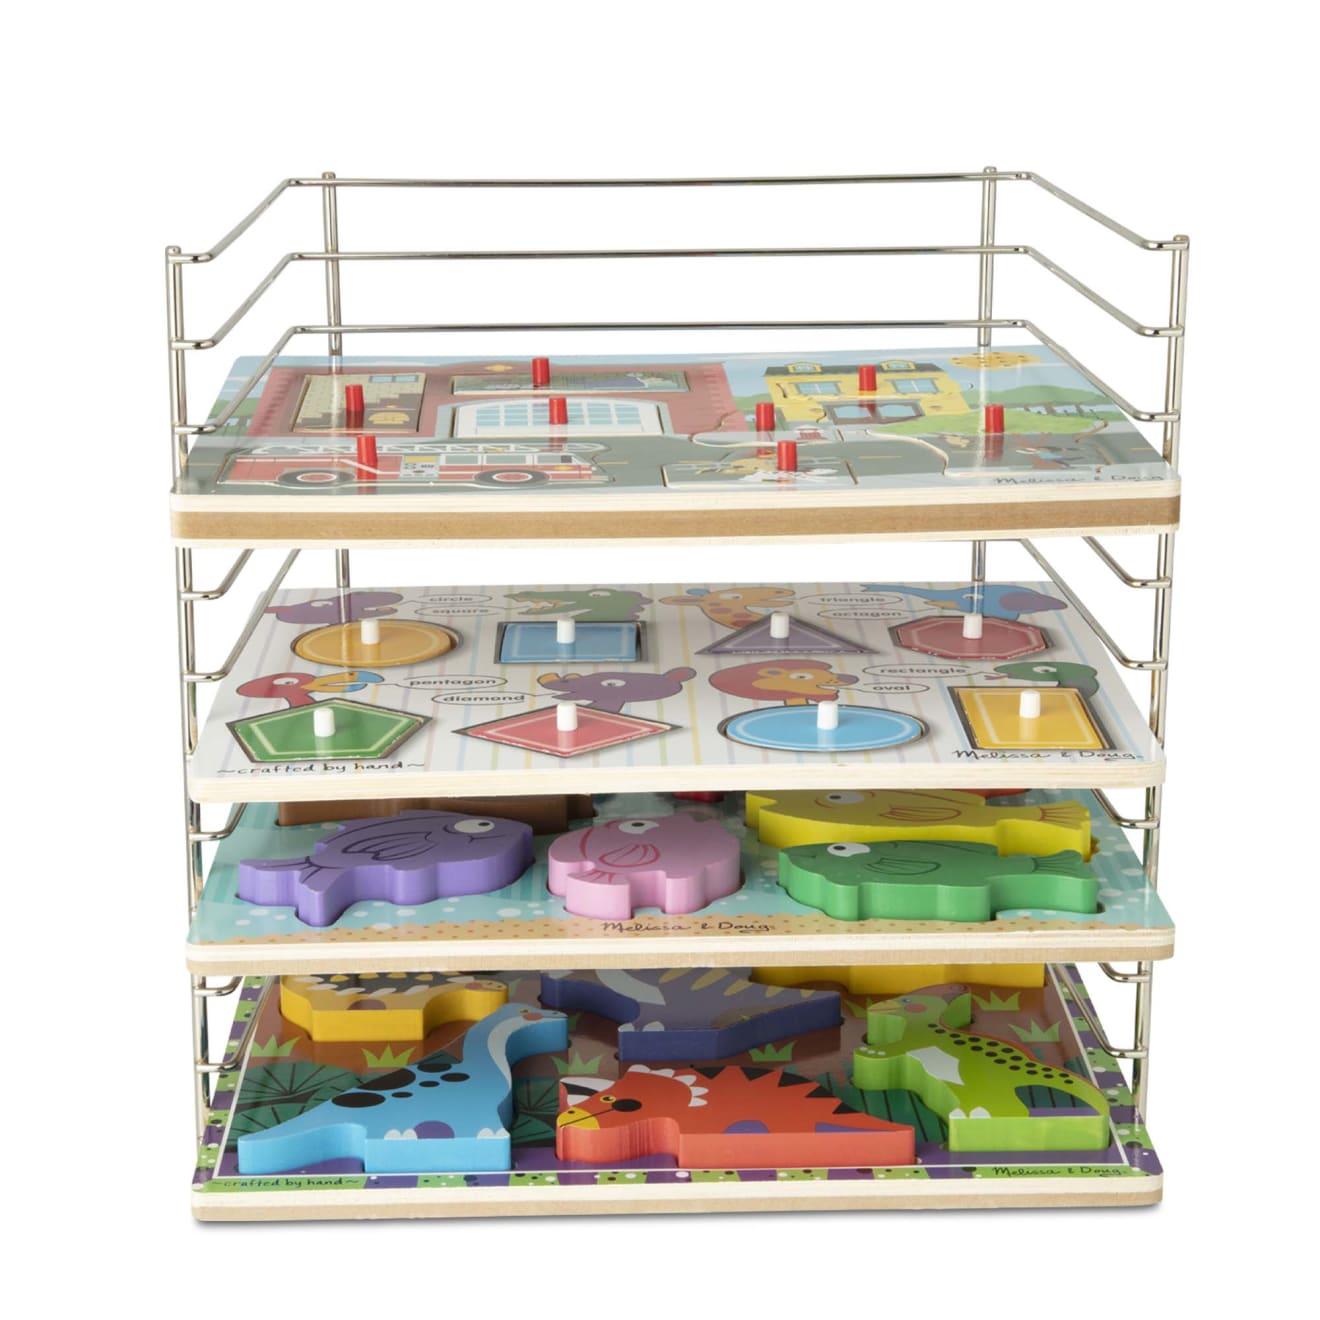 Melissa & Doug Multi-Fit Metal Wire Puzzle Rack 12 Inches Wide and 0.75 Inches Deep